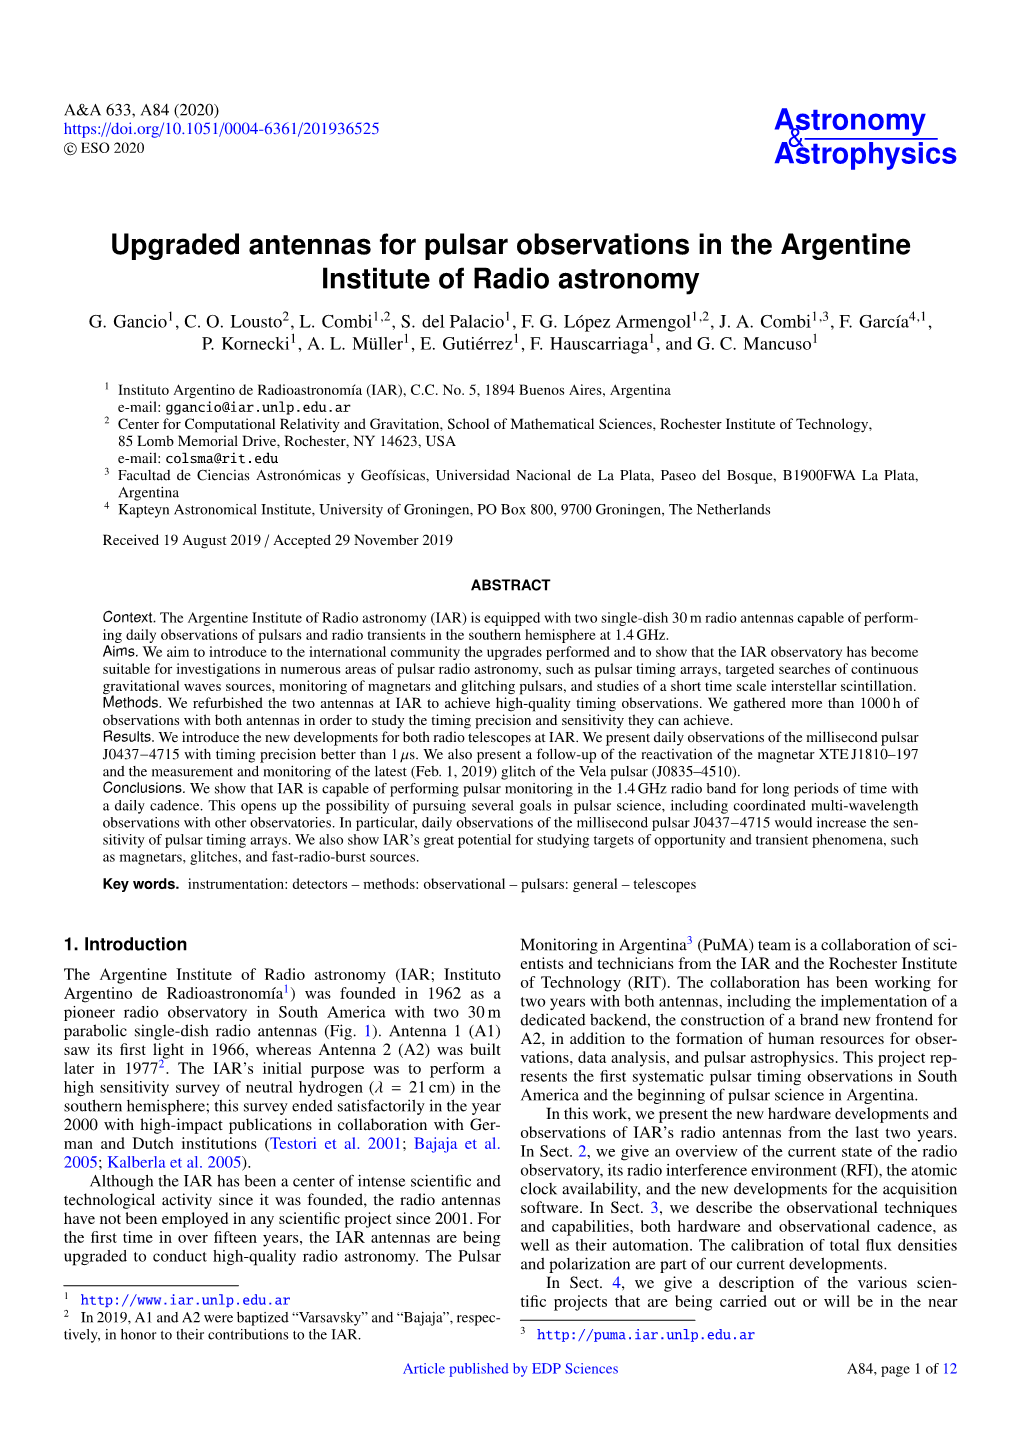 Upgraded Antennas for Pulsar Observations in the Argentine Institute of Radio Astronomy G